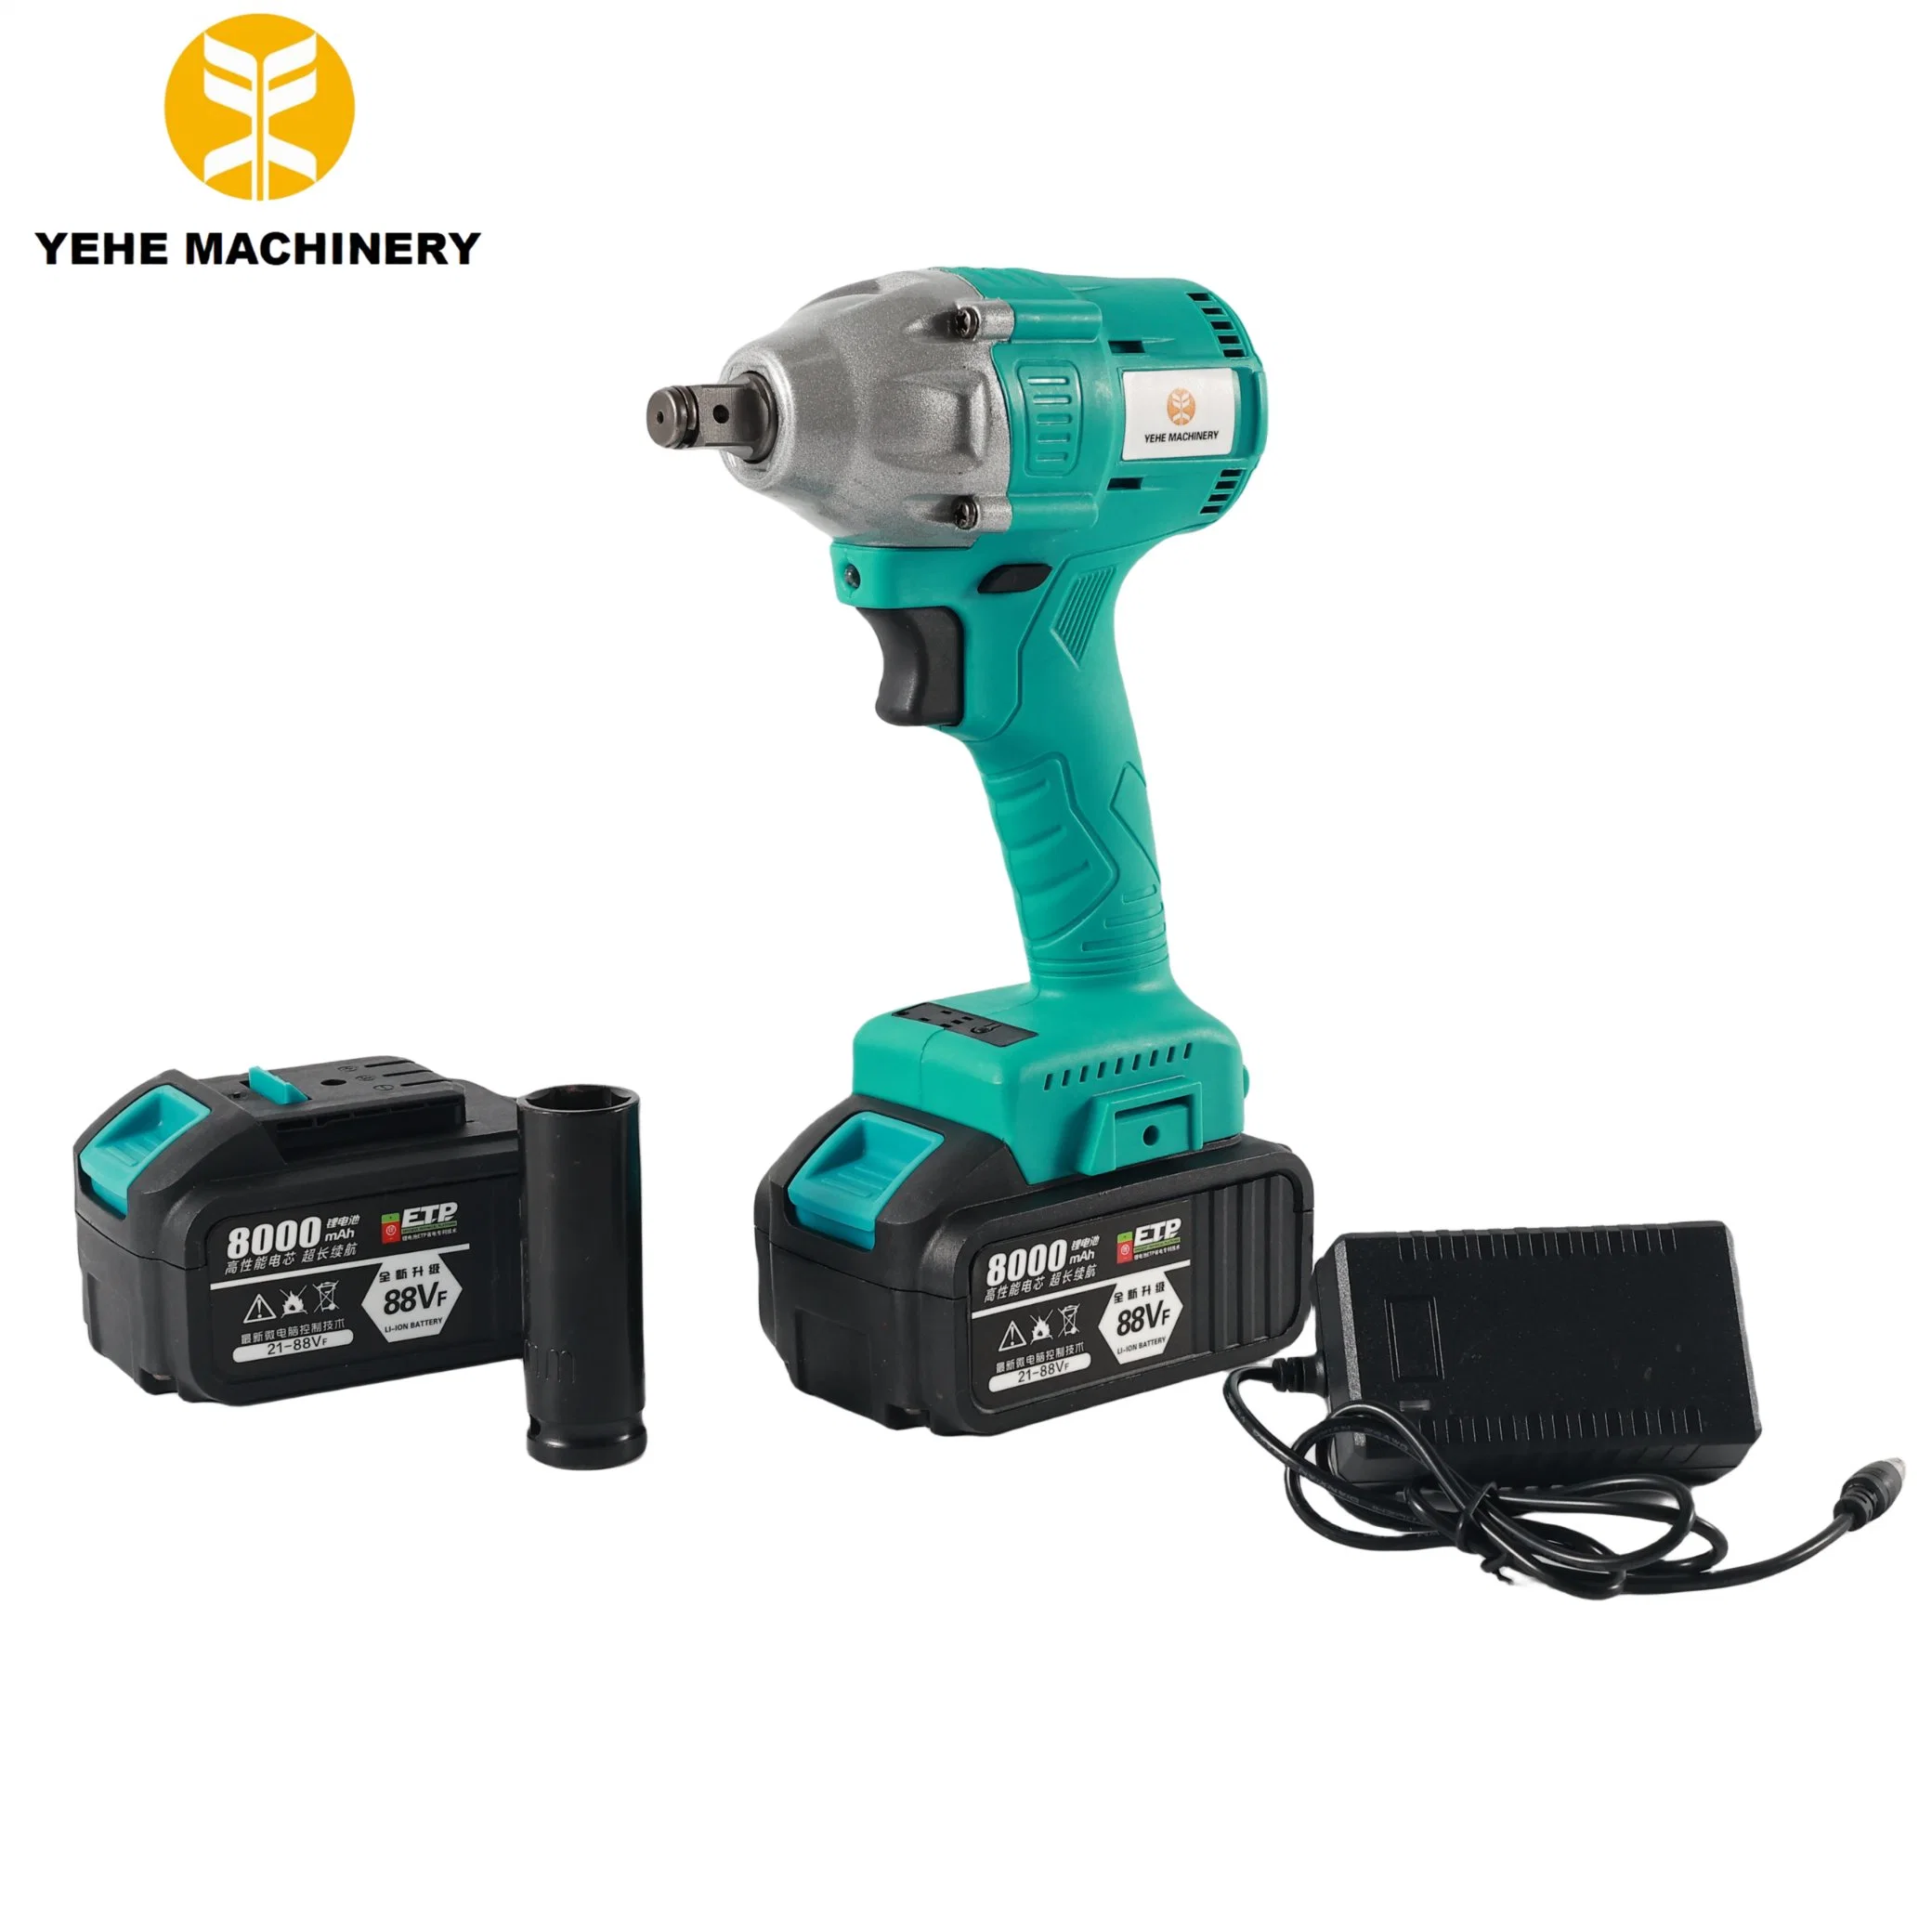 12V/16.8V/21V Power Tools Drill Kit Cordless Drill Set Two Speed Brushless with Two Lithium Ion Batteries